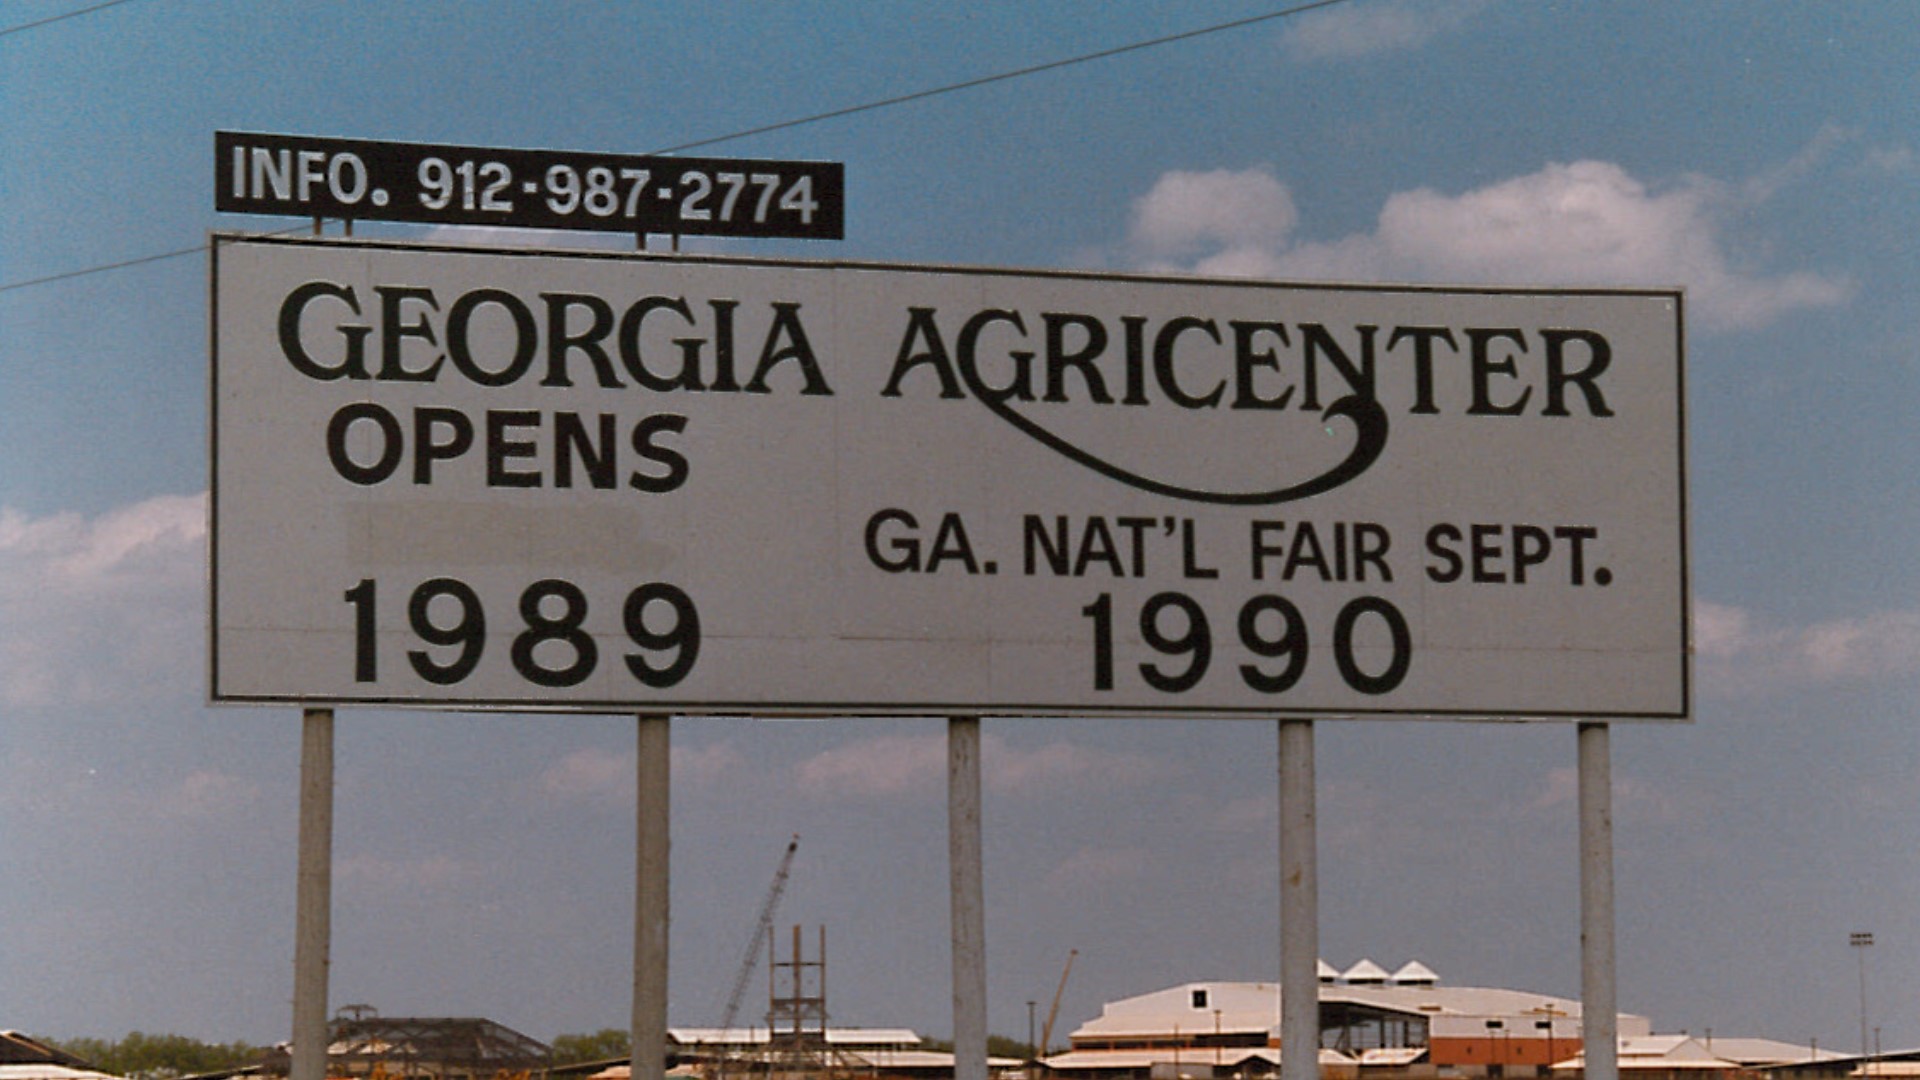 George Neal, Cindy Bellew, Richard Scuderi and Pat Alligood have been key players in the Georgia National Fair since it started 30 years ago.